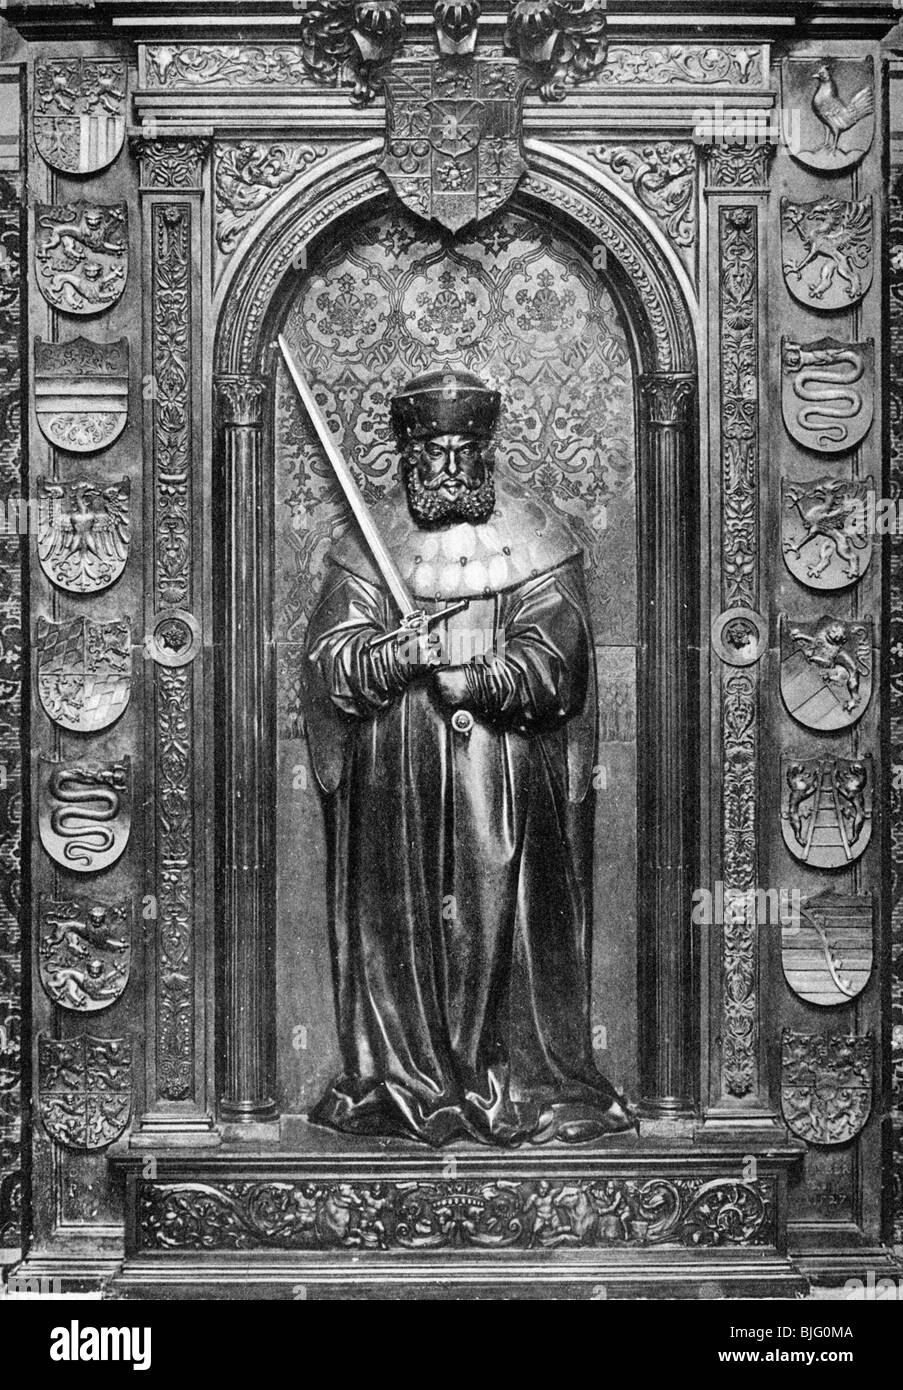 Frederick III 'the Wise', 17.1.1486 - 5.5.1525, Elector of Saxony 26.8.1486 - 5.5.1525, tomb, sculpture by Peter Vischer, 1527, view, 1926, , Stock Photo